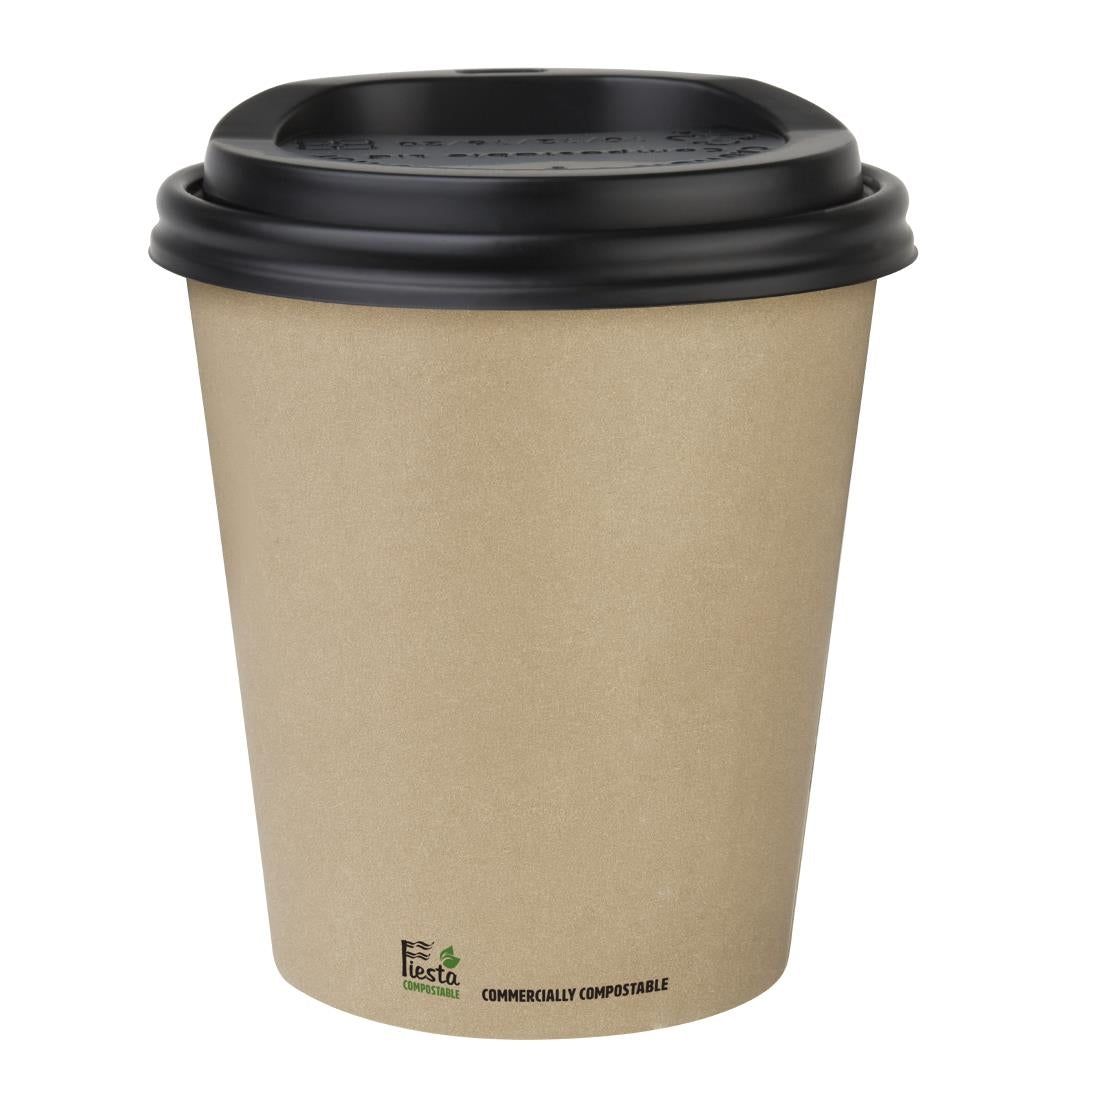 CU983 Fiesta Compostable Coffee Cups Single Wall 12oz (Pack of 50)